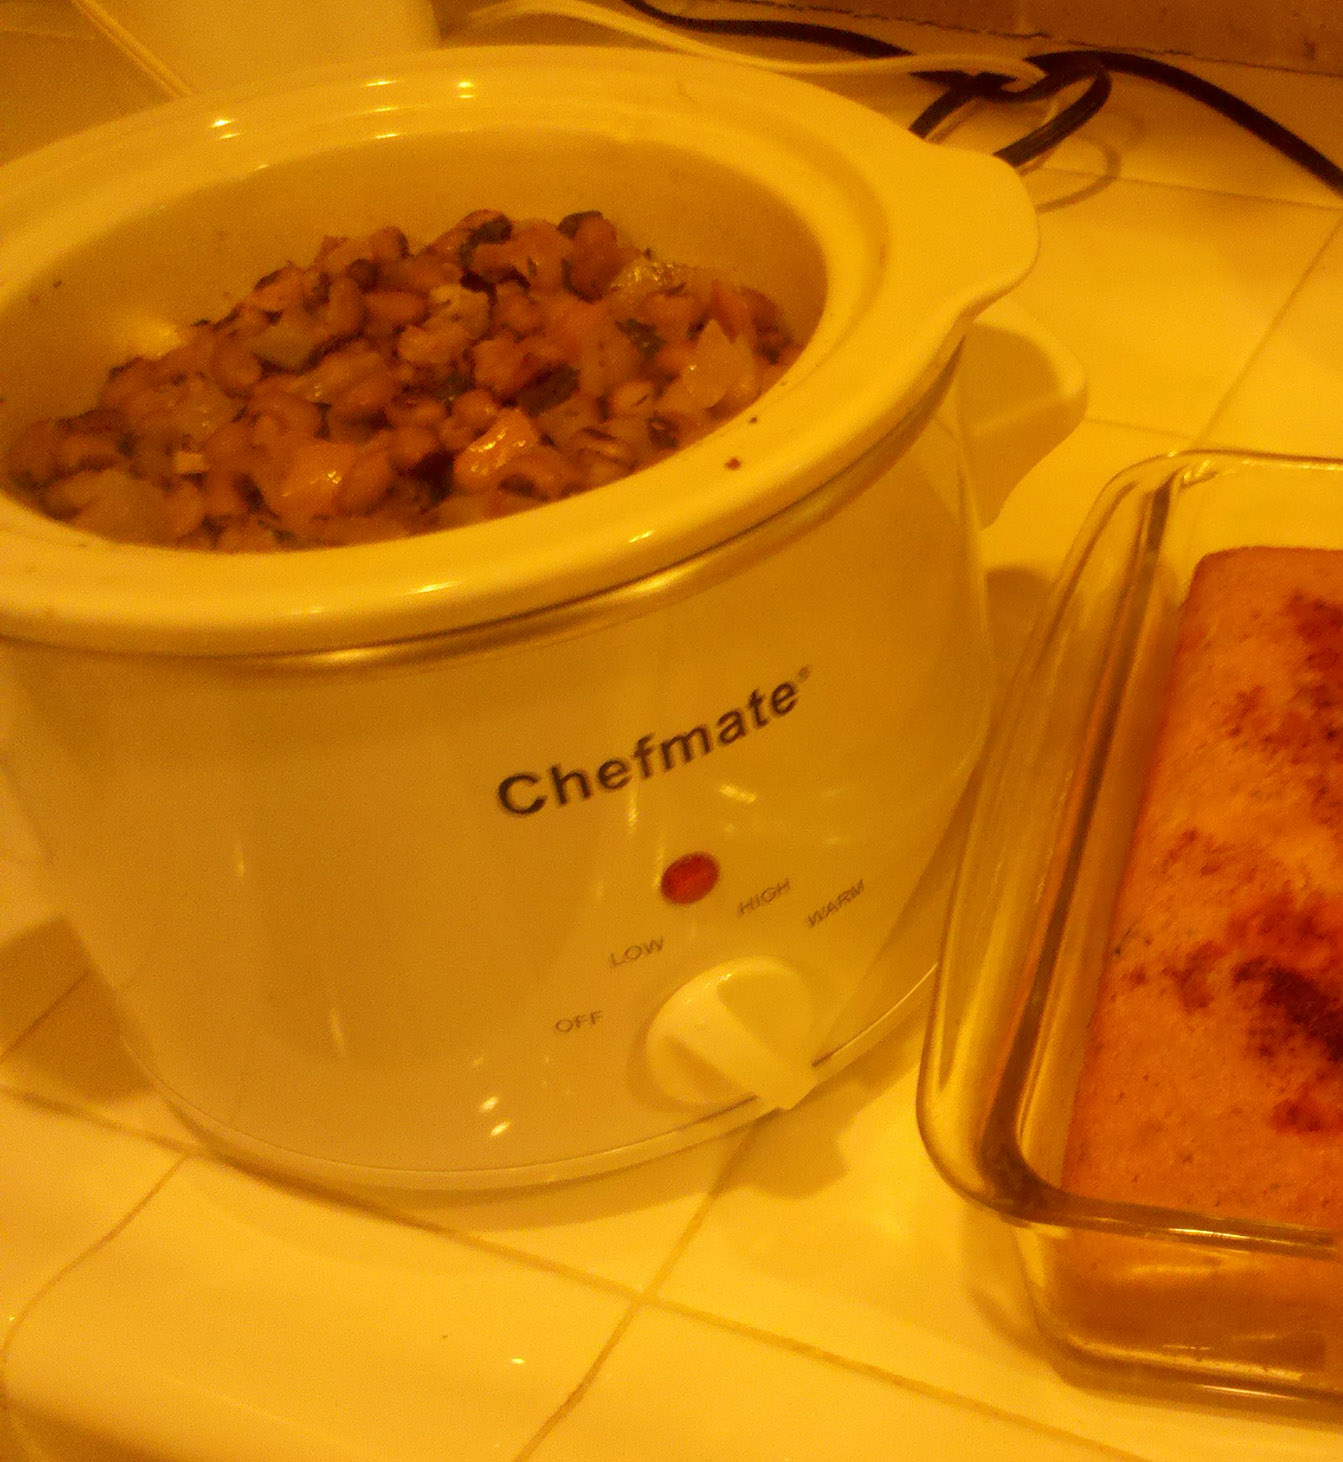 Warming my 2011 Black-eyed peas in the crock pot, with paprika dusted cornbread on the side